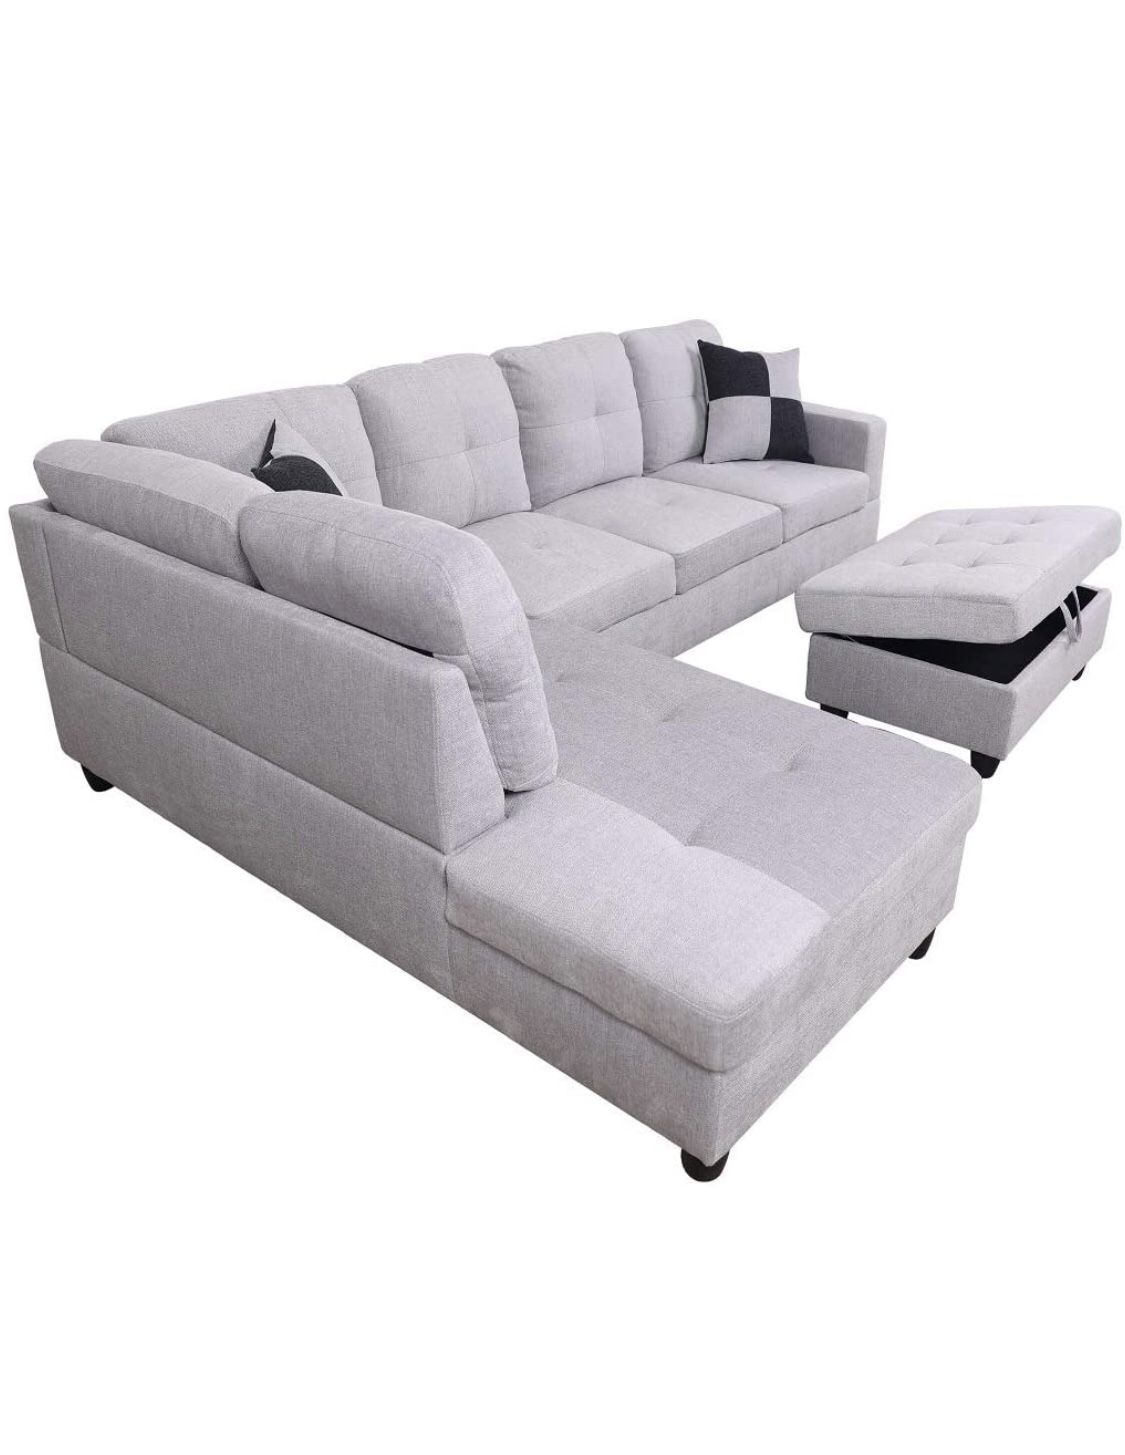 Light gray Sectional Couch fabric 